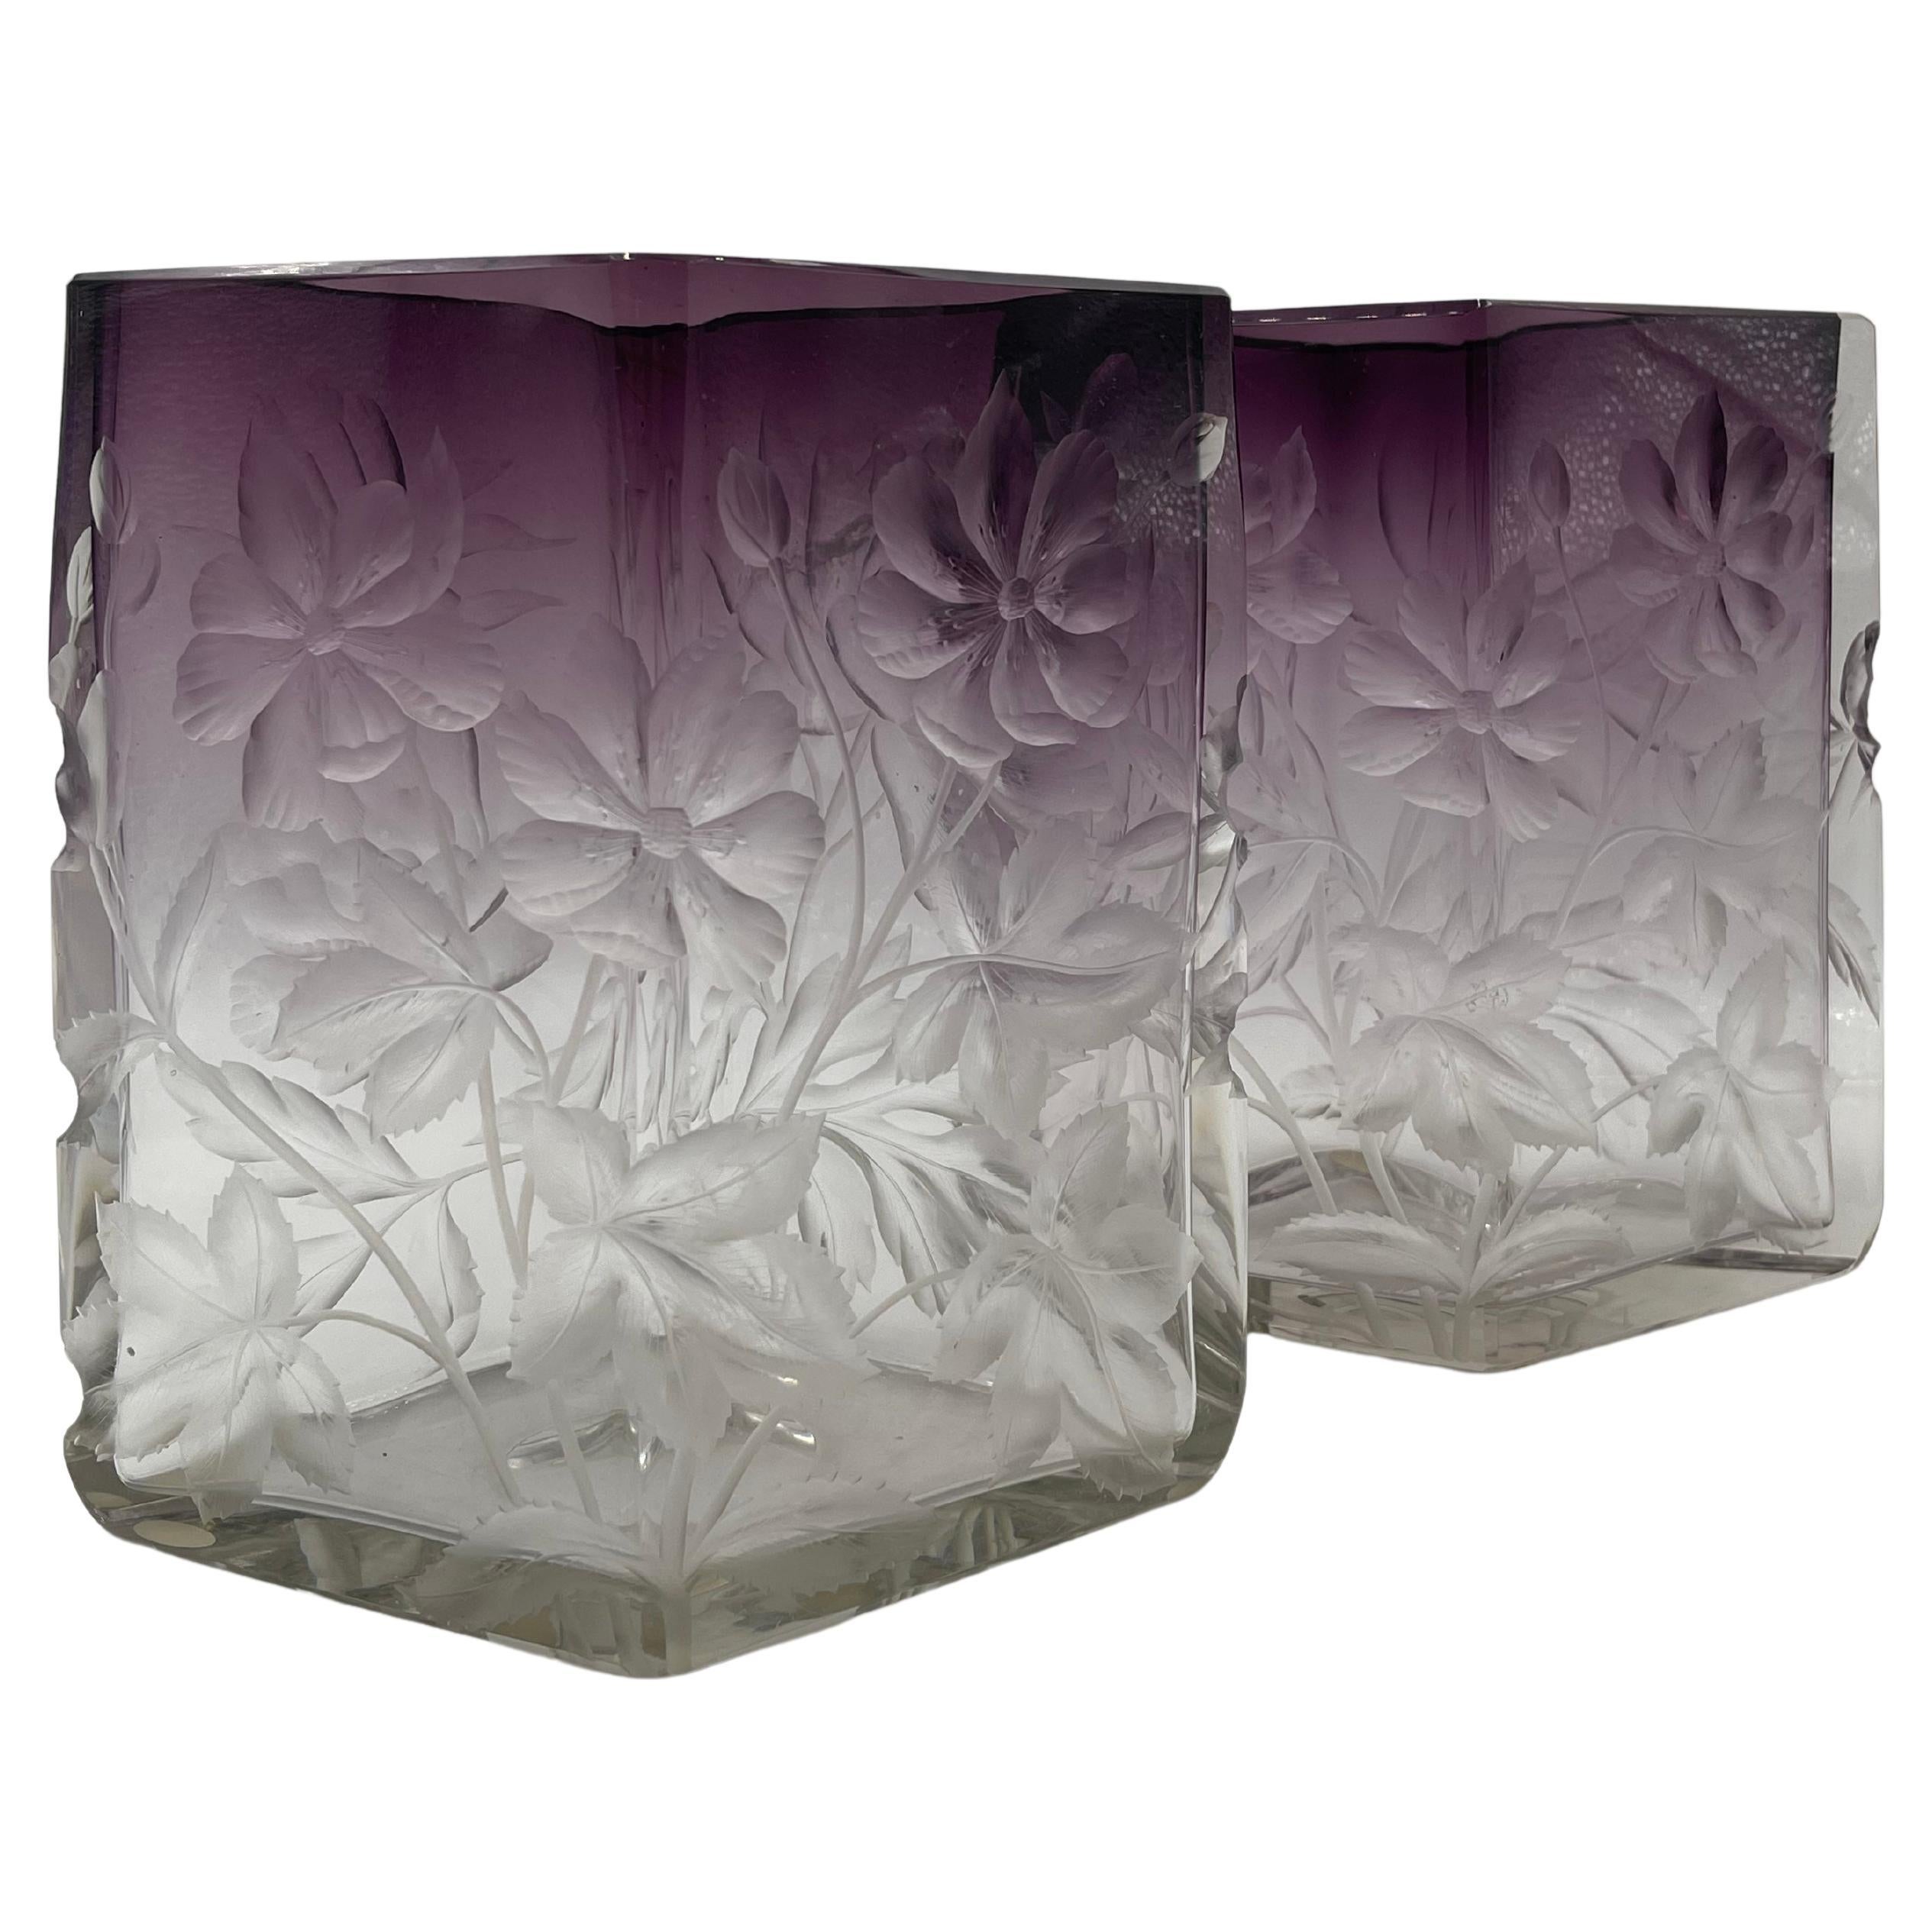 Pair of Moser Purple Cut to Clear Intaglio Vases